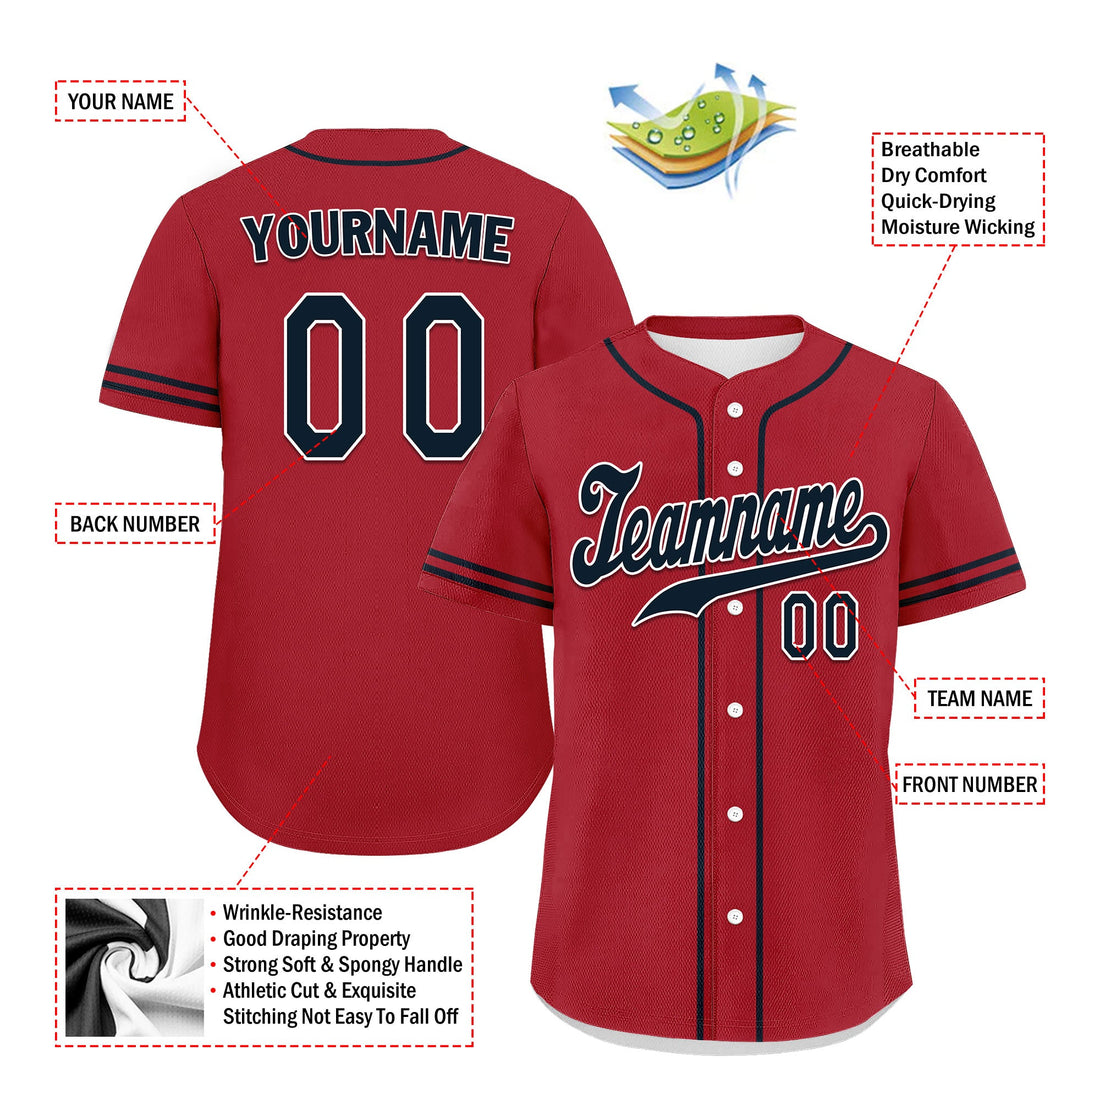 Custom Red Classic Style Black Personalized Authentic Baseball Jersey UN002-bd0b00d8-f